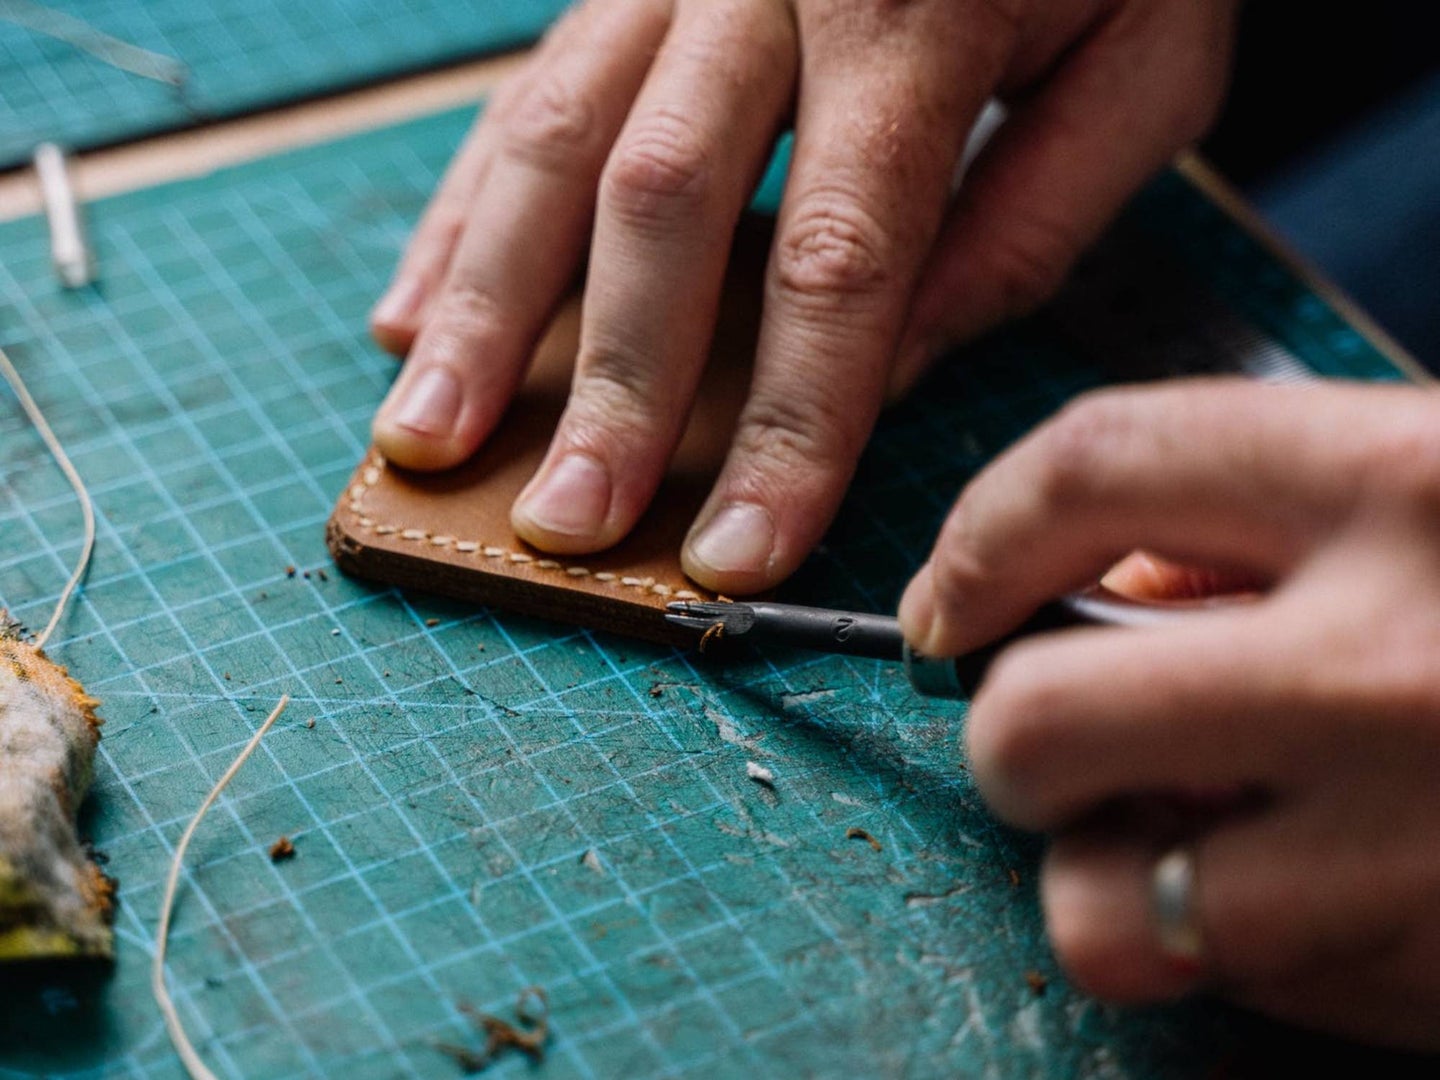 Hands working on edging a piece of leatherwork